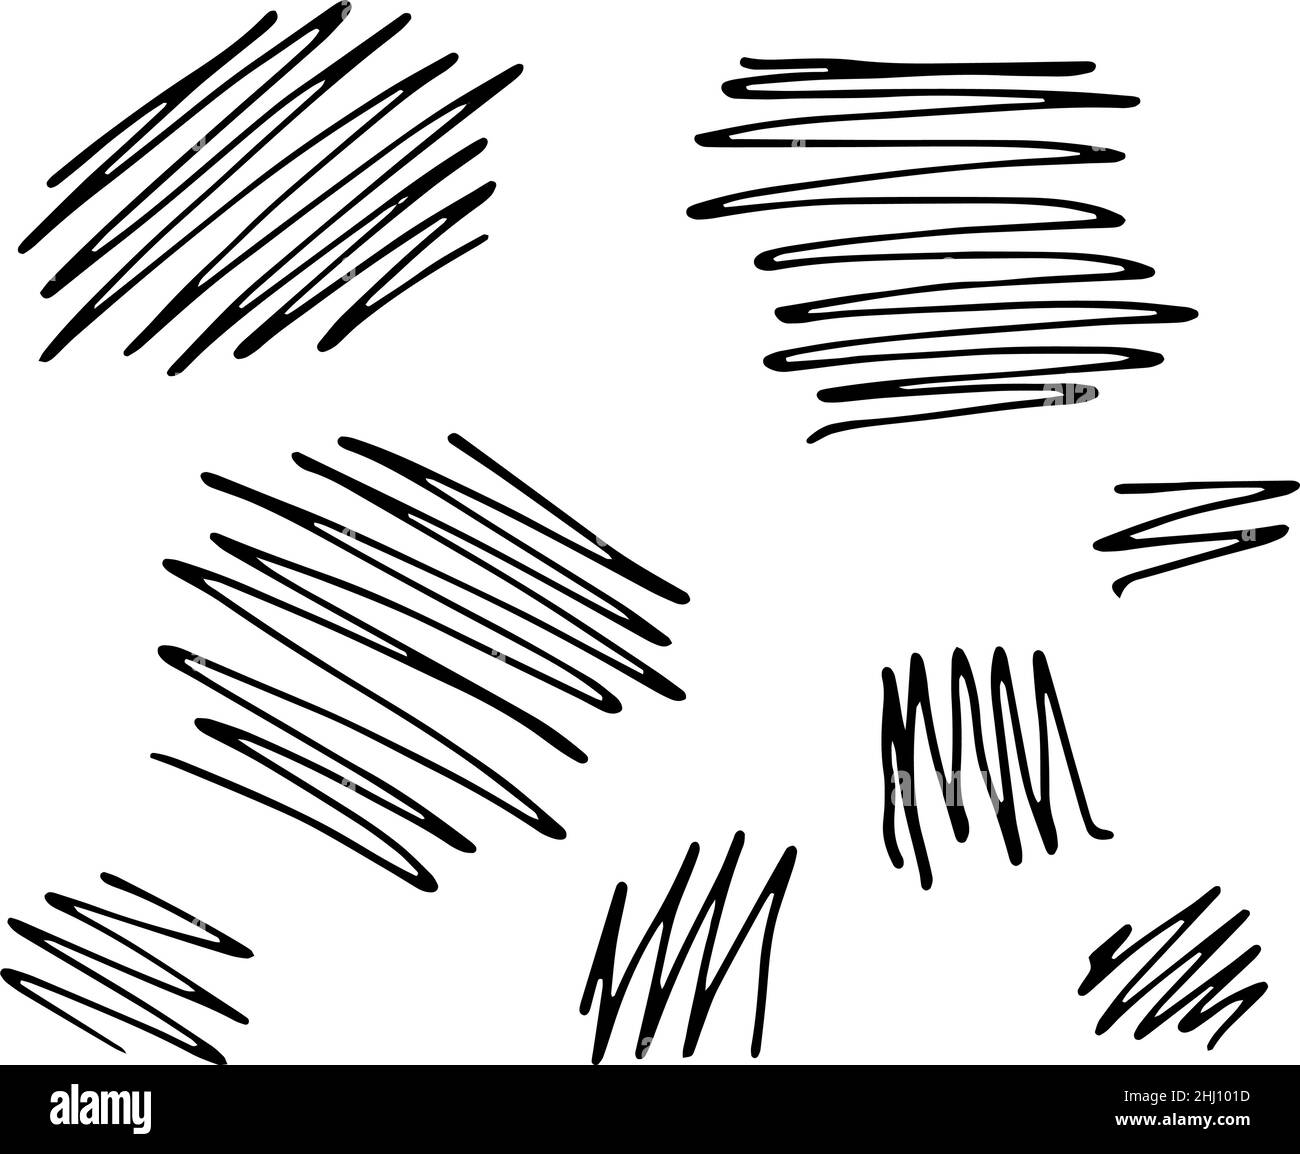 Abstract hand drawn monochrome simple doodle vector pattern of group of scribble lines. Black scrawl on white background Stock Vector